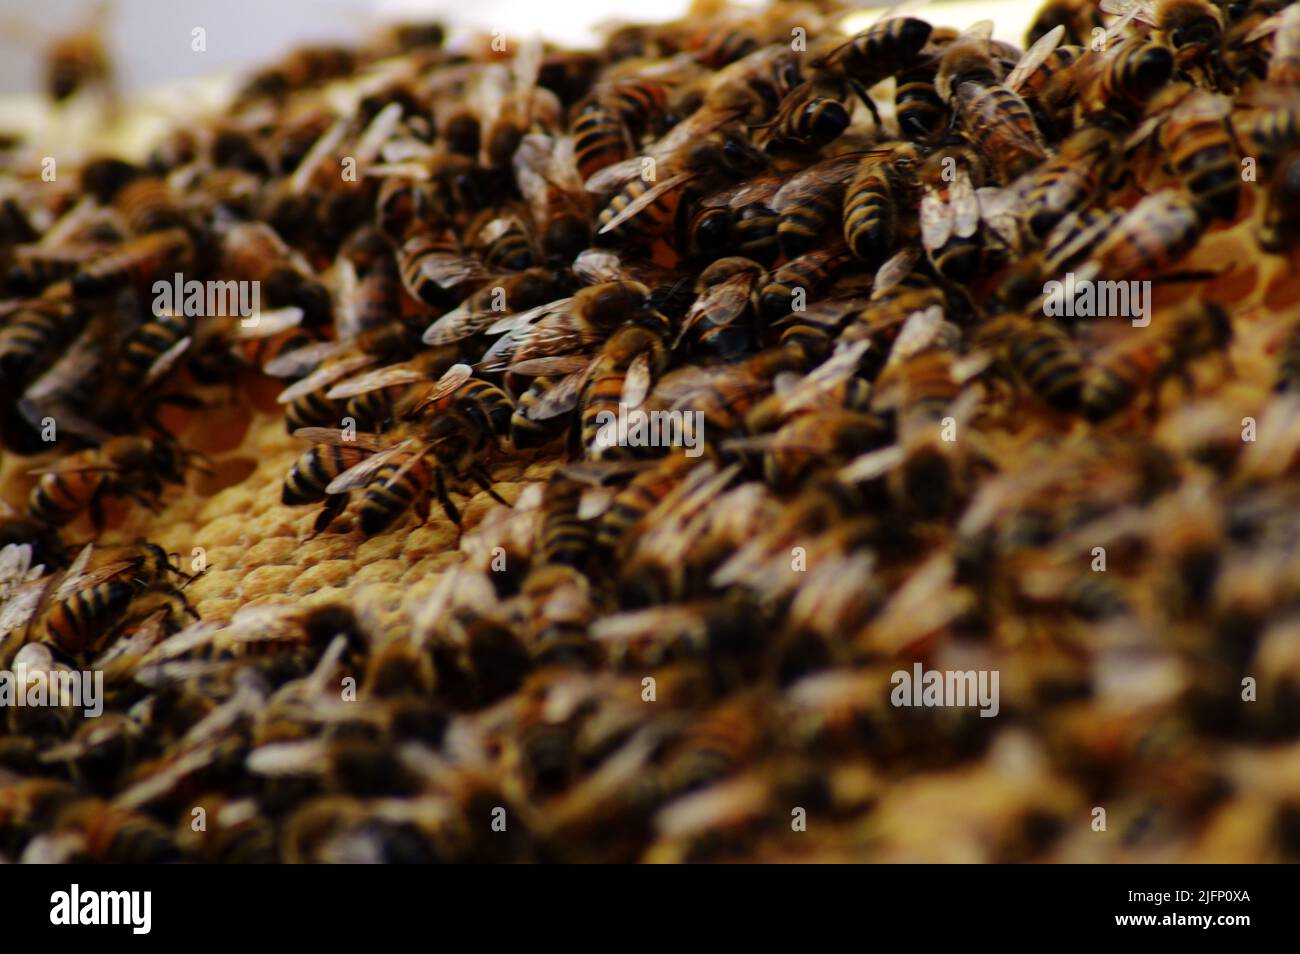 Busy Honey Bees working hard in the Hive Stock Photo